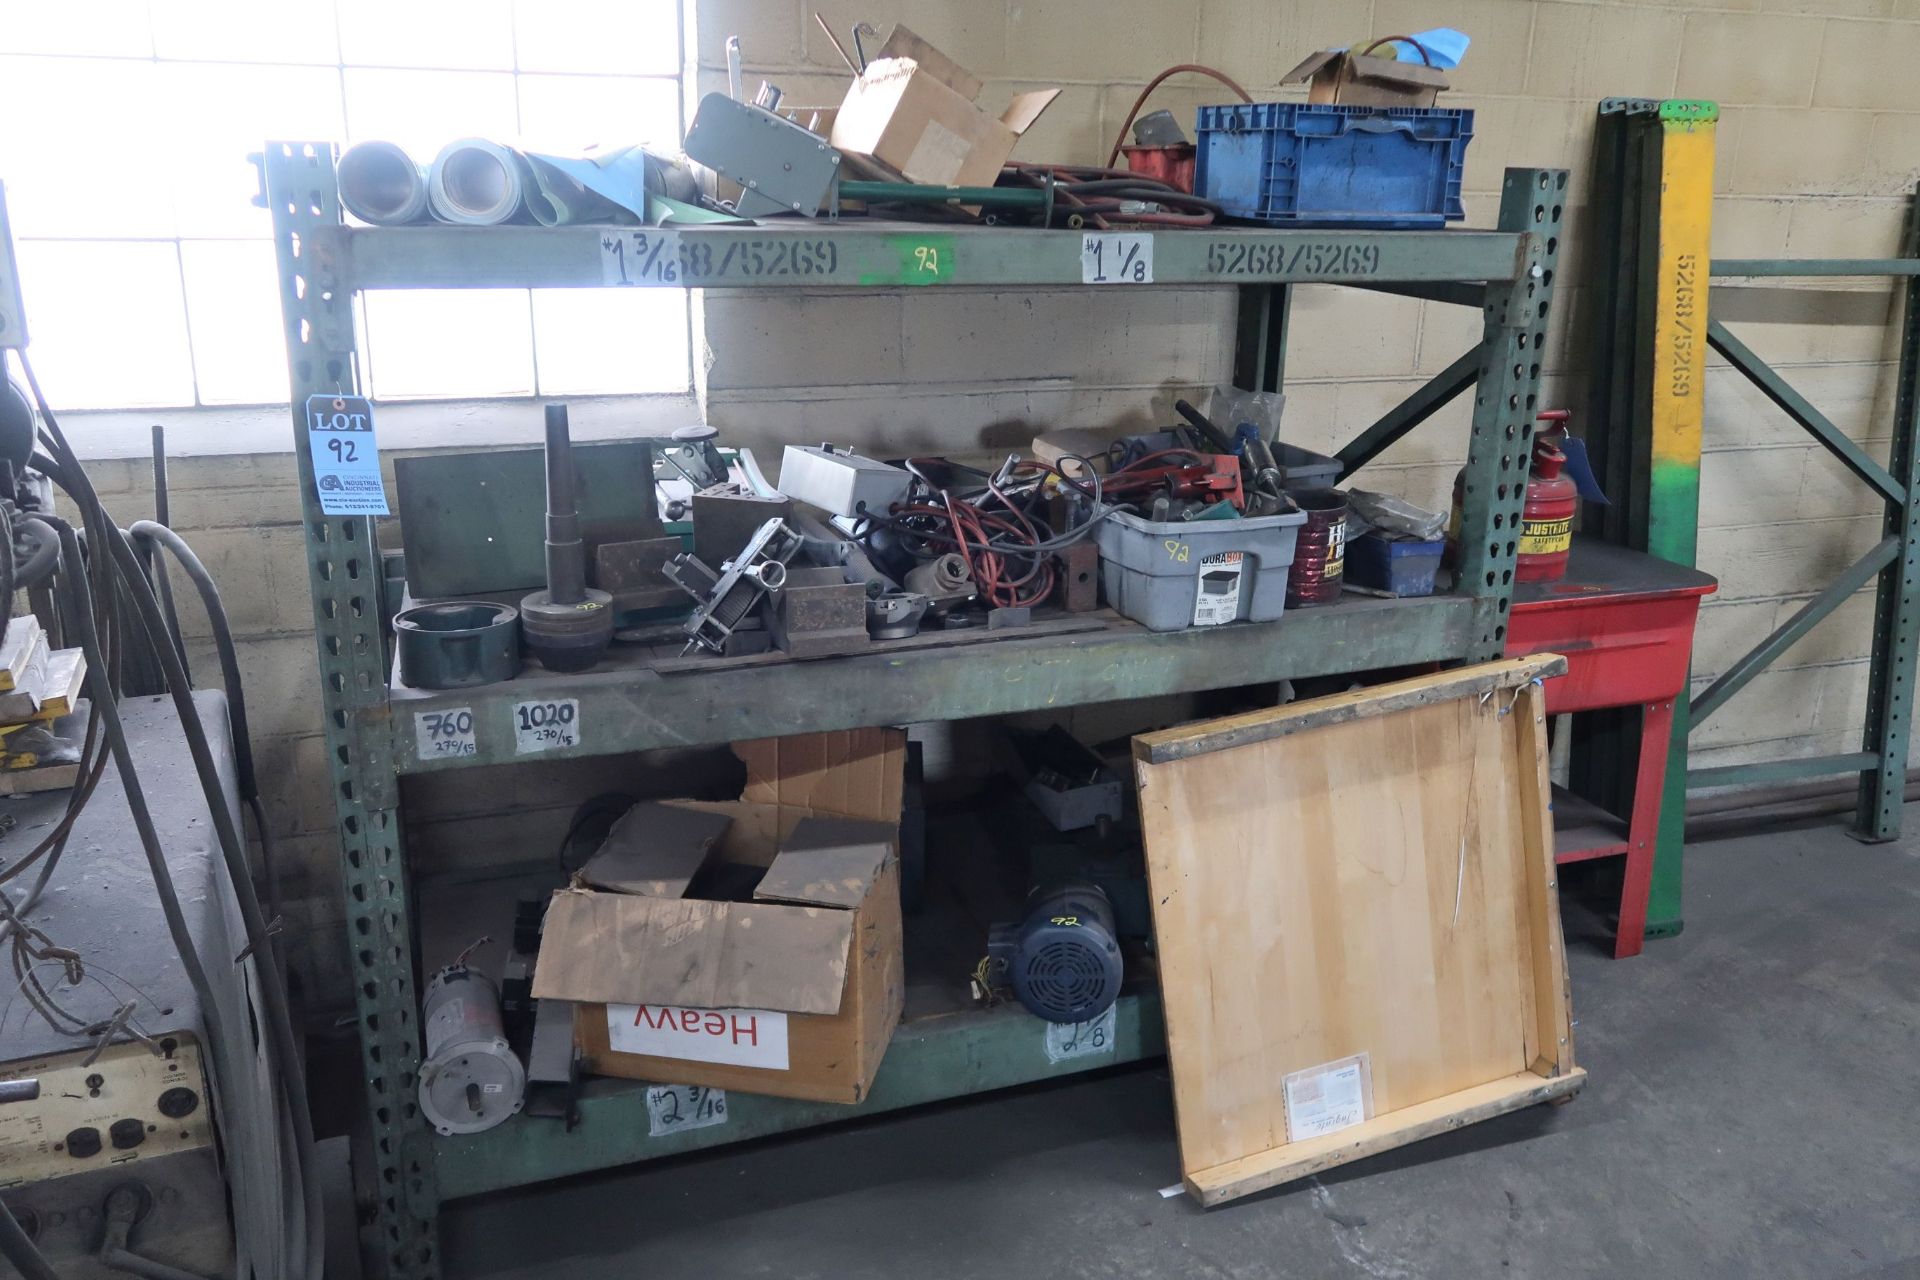 SECTION 34" X 72" X 66" ADJUSTABLE BEAM PALLET RACK WITH CONTENTS MACHINE PARTS, TOOLING, MOTOR,